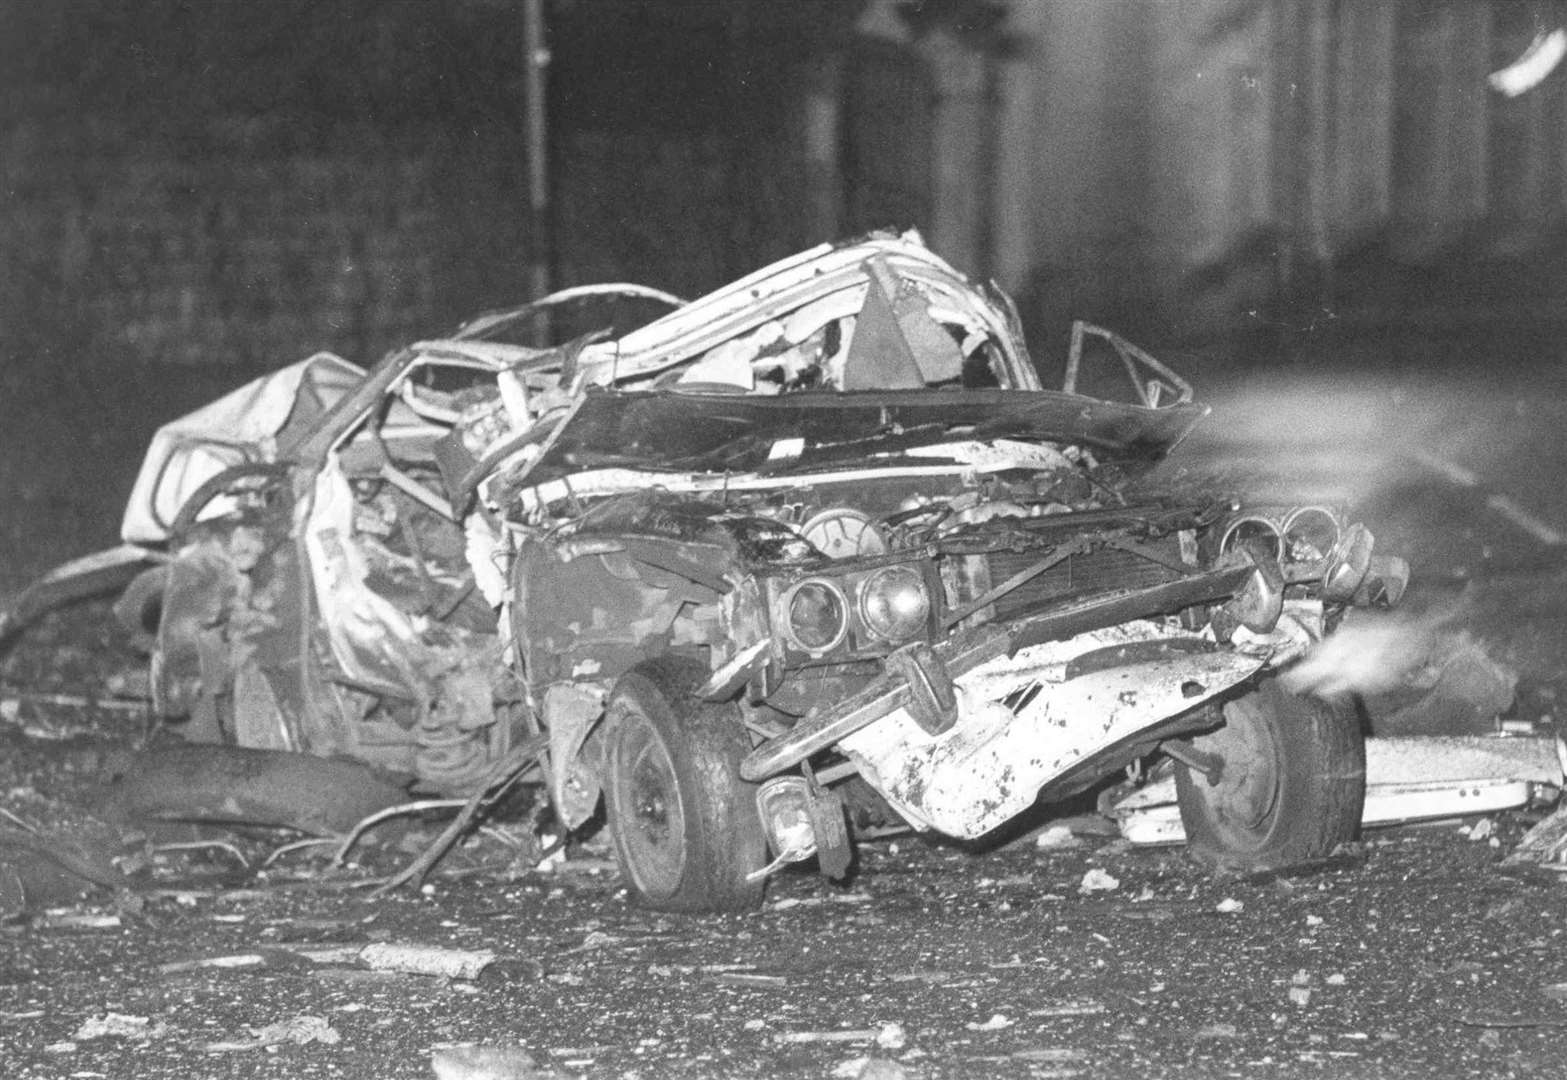 Brian Wooster's car was destroyed by an IRA bombing in 1975